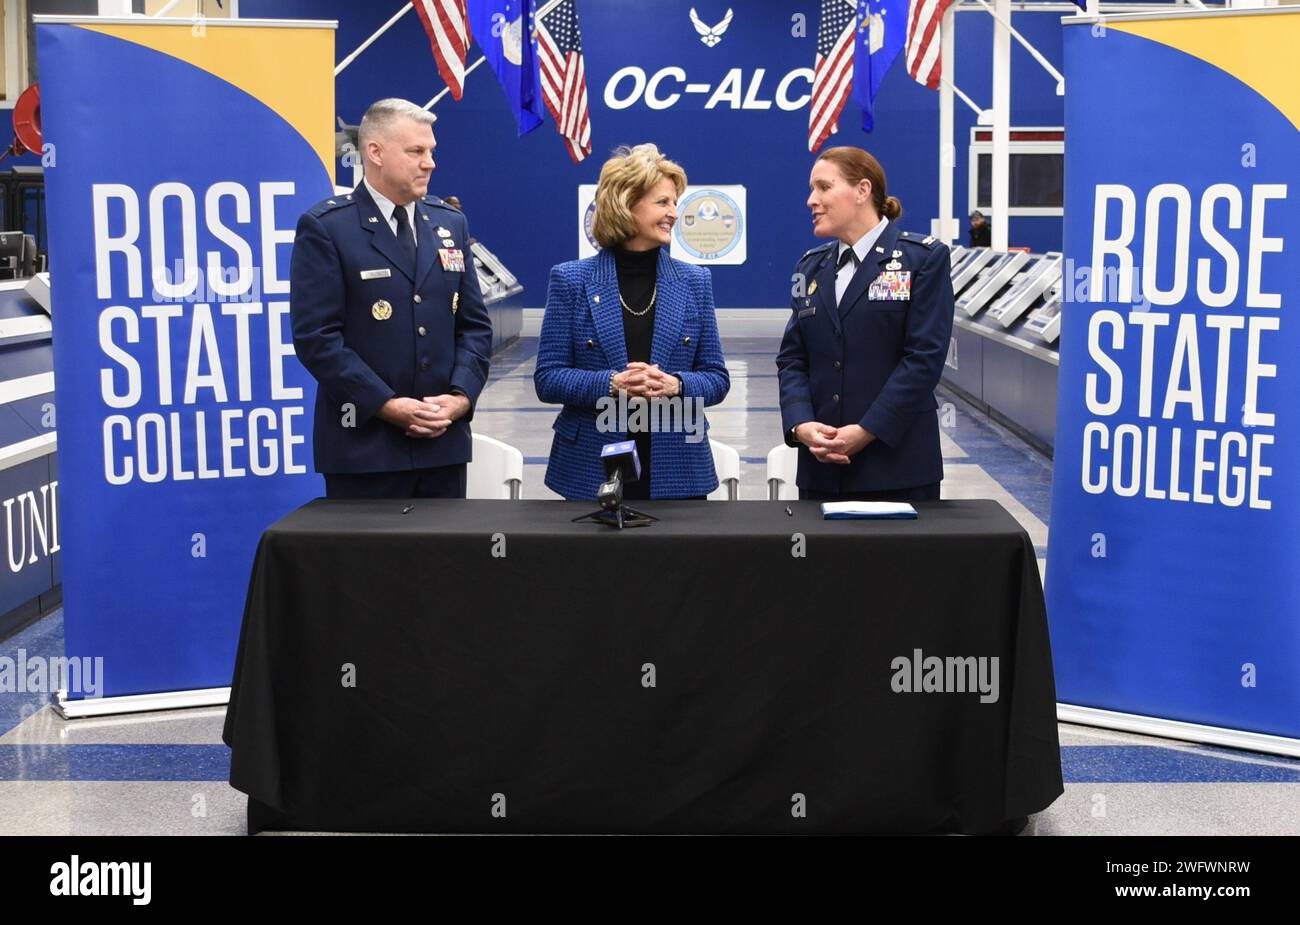 TINKER AIR FORCE BASE, Okla. — Col. Abigail Ruscetta, right, commander of the 72nd Air Base Wing, provides remarks during a ceremonial signing event in celebration of the education partnership agreement among Rose State College, the OC-ALC and the 72nd Air Base Wing on Tinker Air Force Base, Oklahoma, Jan. 17. The partnership provides Rose State with access to industry resources and experts while providing a pipeline for Rose’s STEM students to explore a career at the OC-ALC, which is the largest single-site employer in the state of Oklahoma. Stock Photo